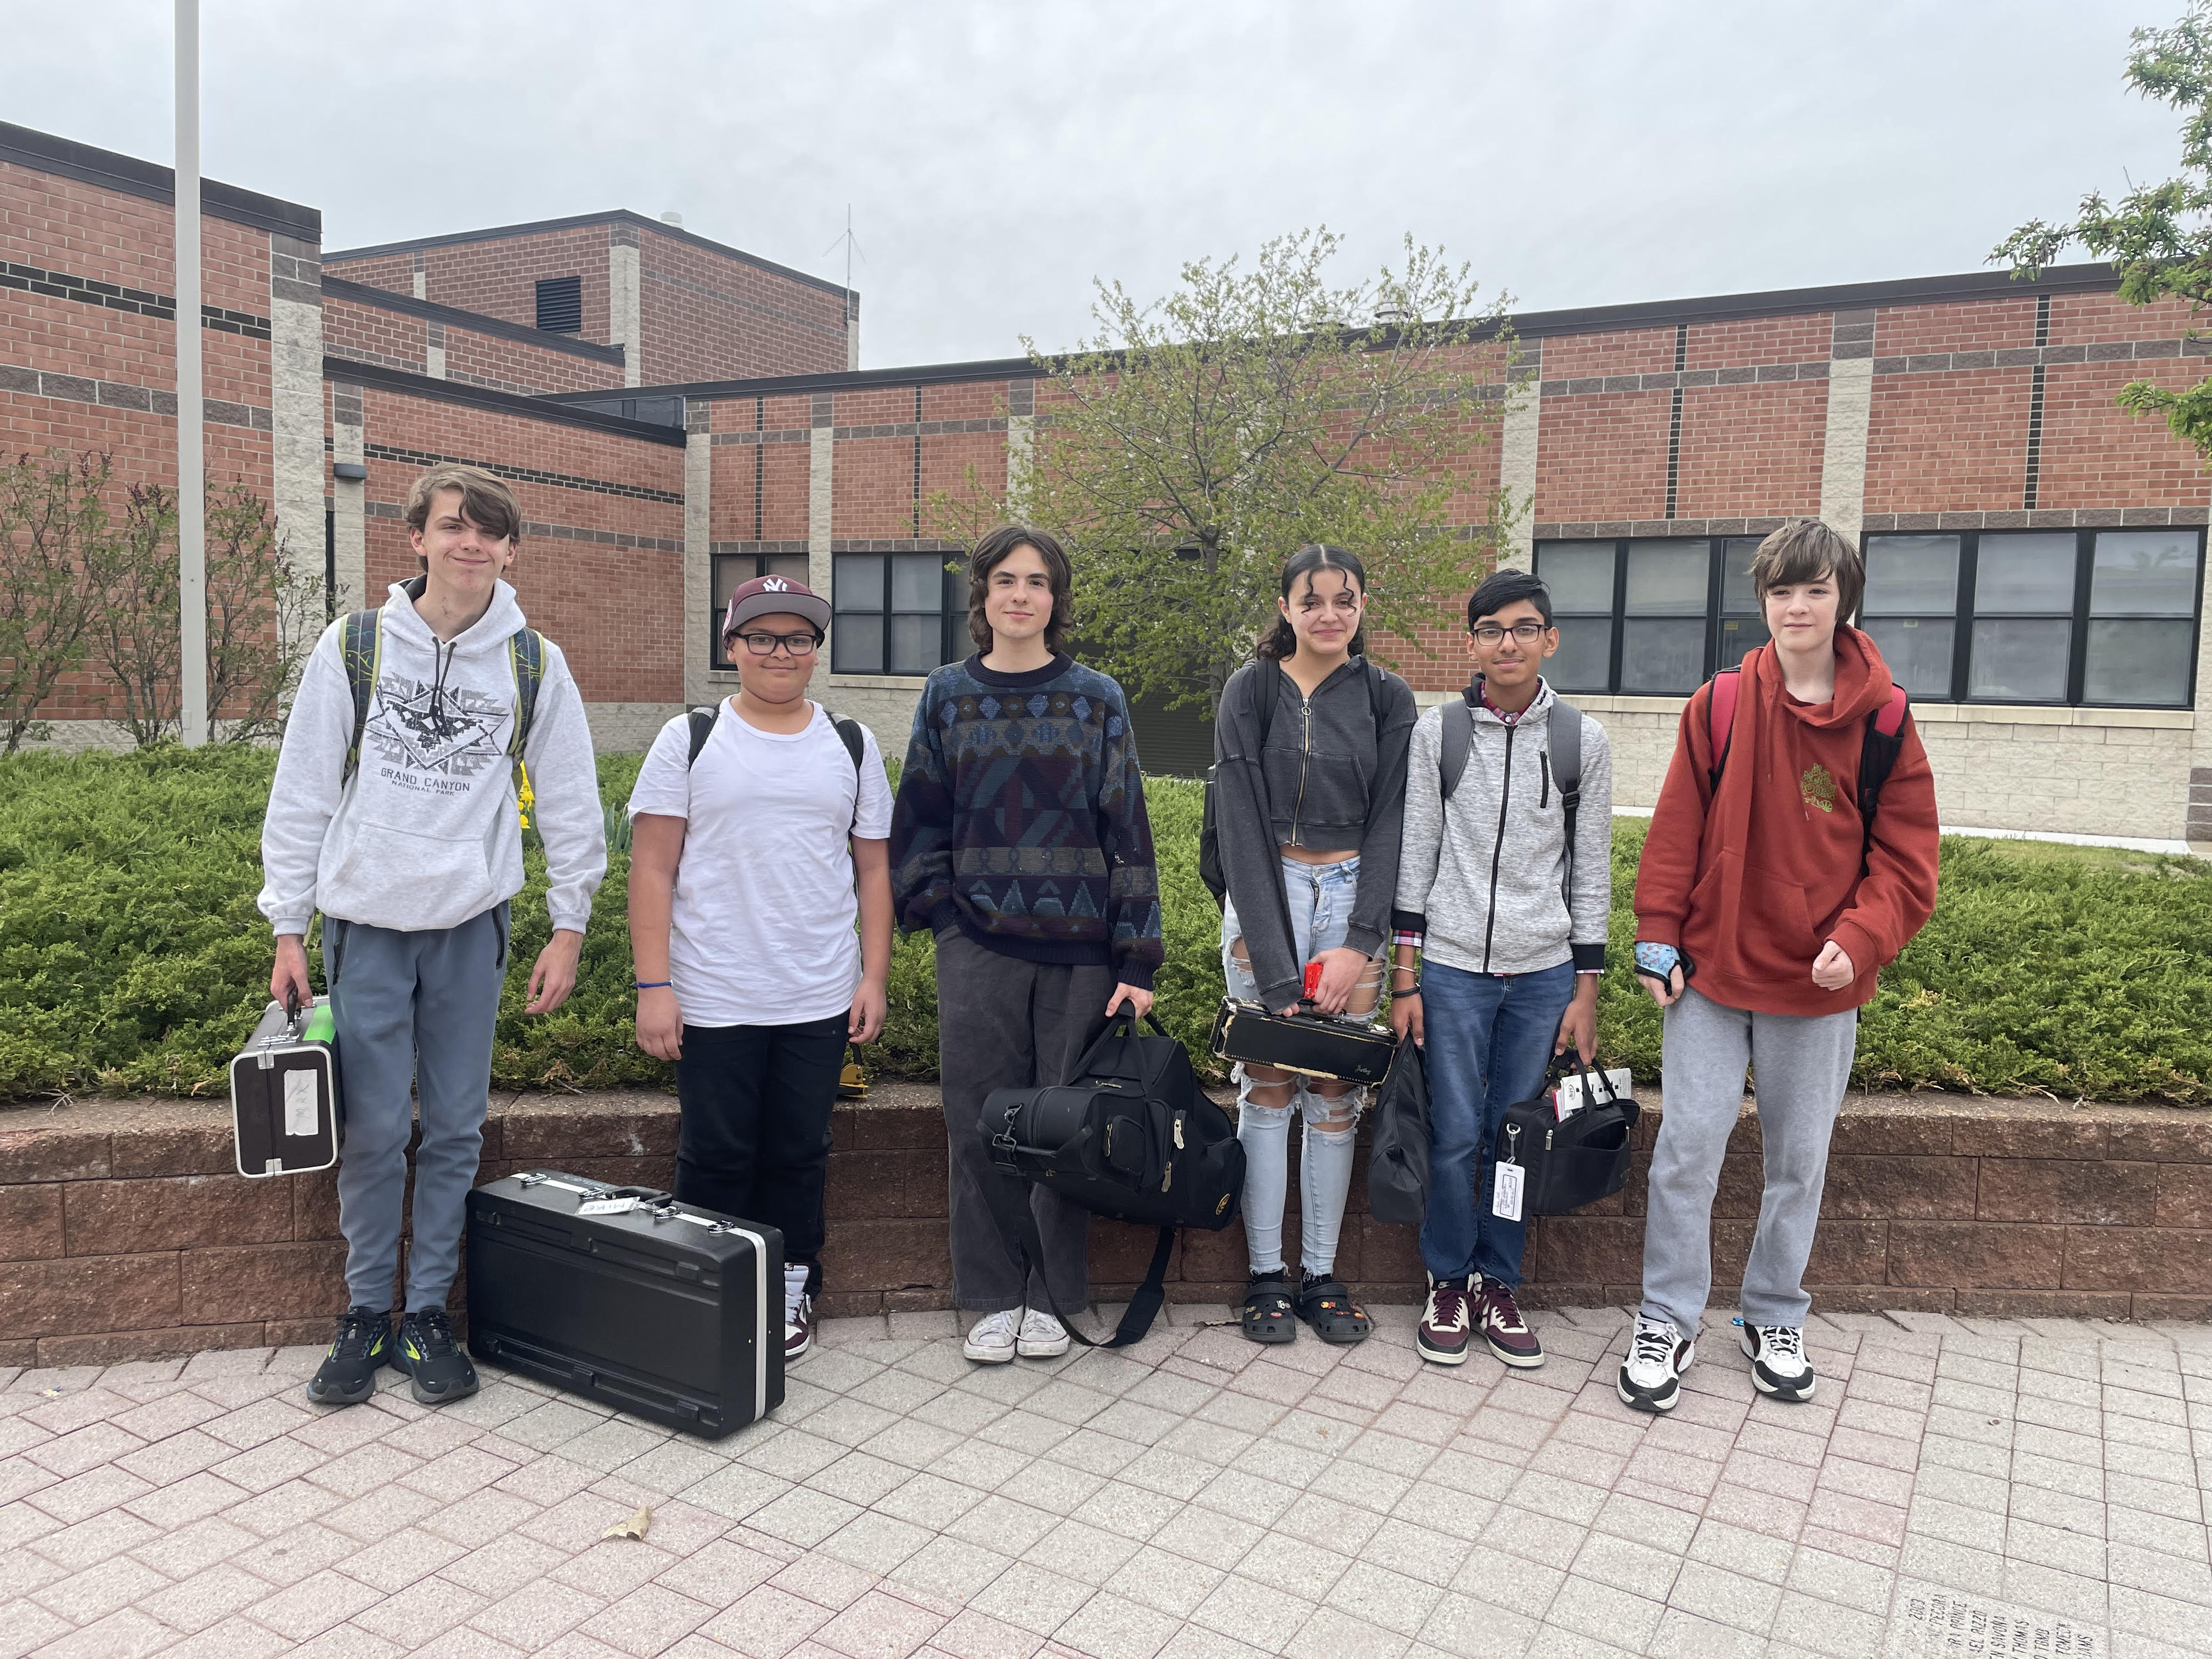 The Suburban Council Music Festival was held at Ballston Spa HS in late April. Representing Schenectady were Max Tobey, CP (band); Michael Medina, MP (band); Angelo Delaney, SHS (Jazz); Zoe Daniels, OMS (band); Ayan Datt, OMS (band); River Henriksen, OMS (orchestra). We are so proud of their accomplishments and participation in this festival.